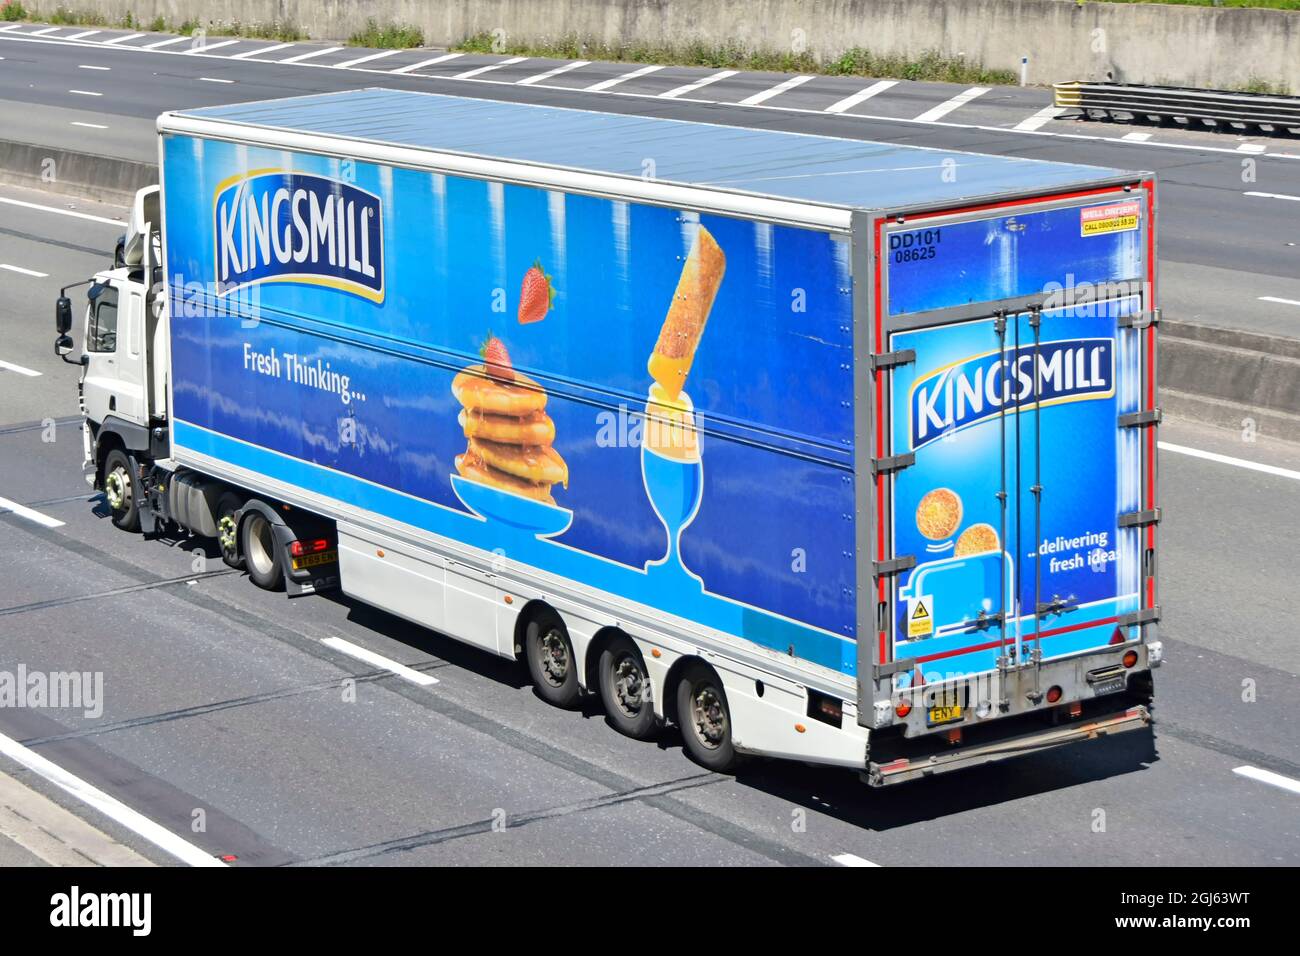 Advertising by Associated British Foods Kingsmill bread brand side & back view of articulated trailer behind white lorry truck driving on UK motorway Stock Photo